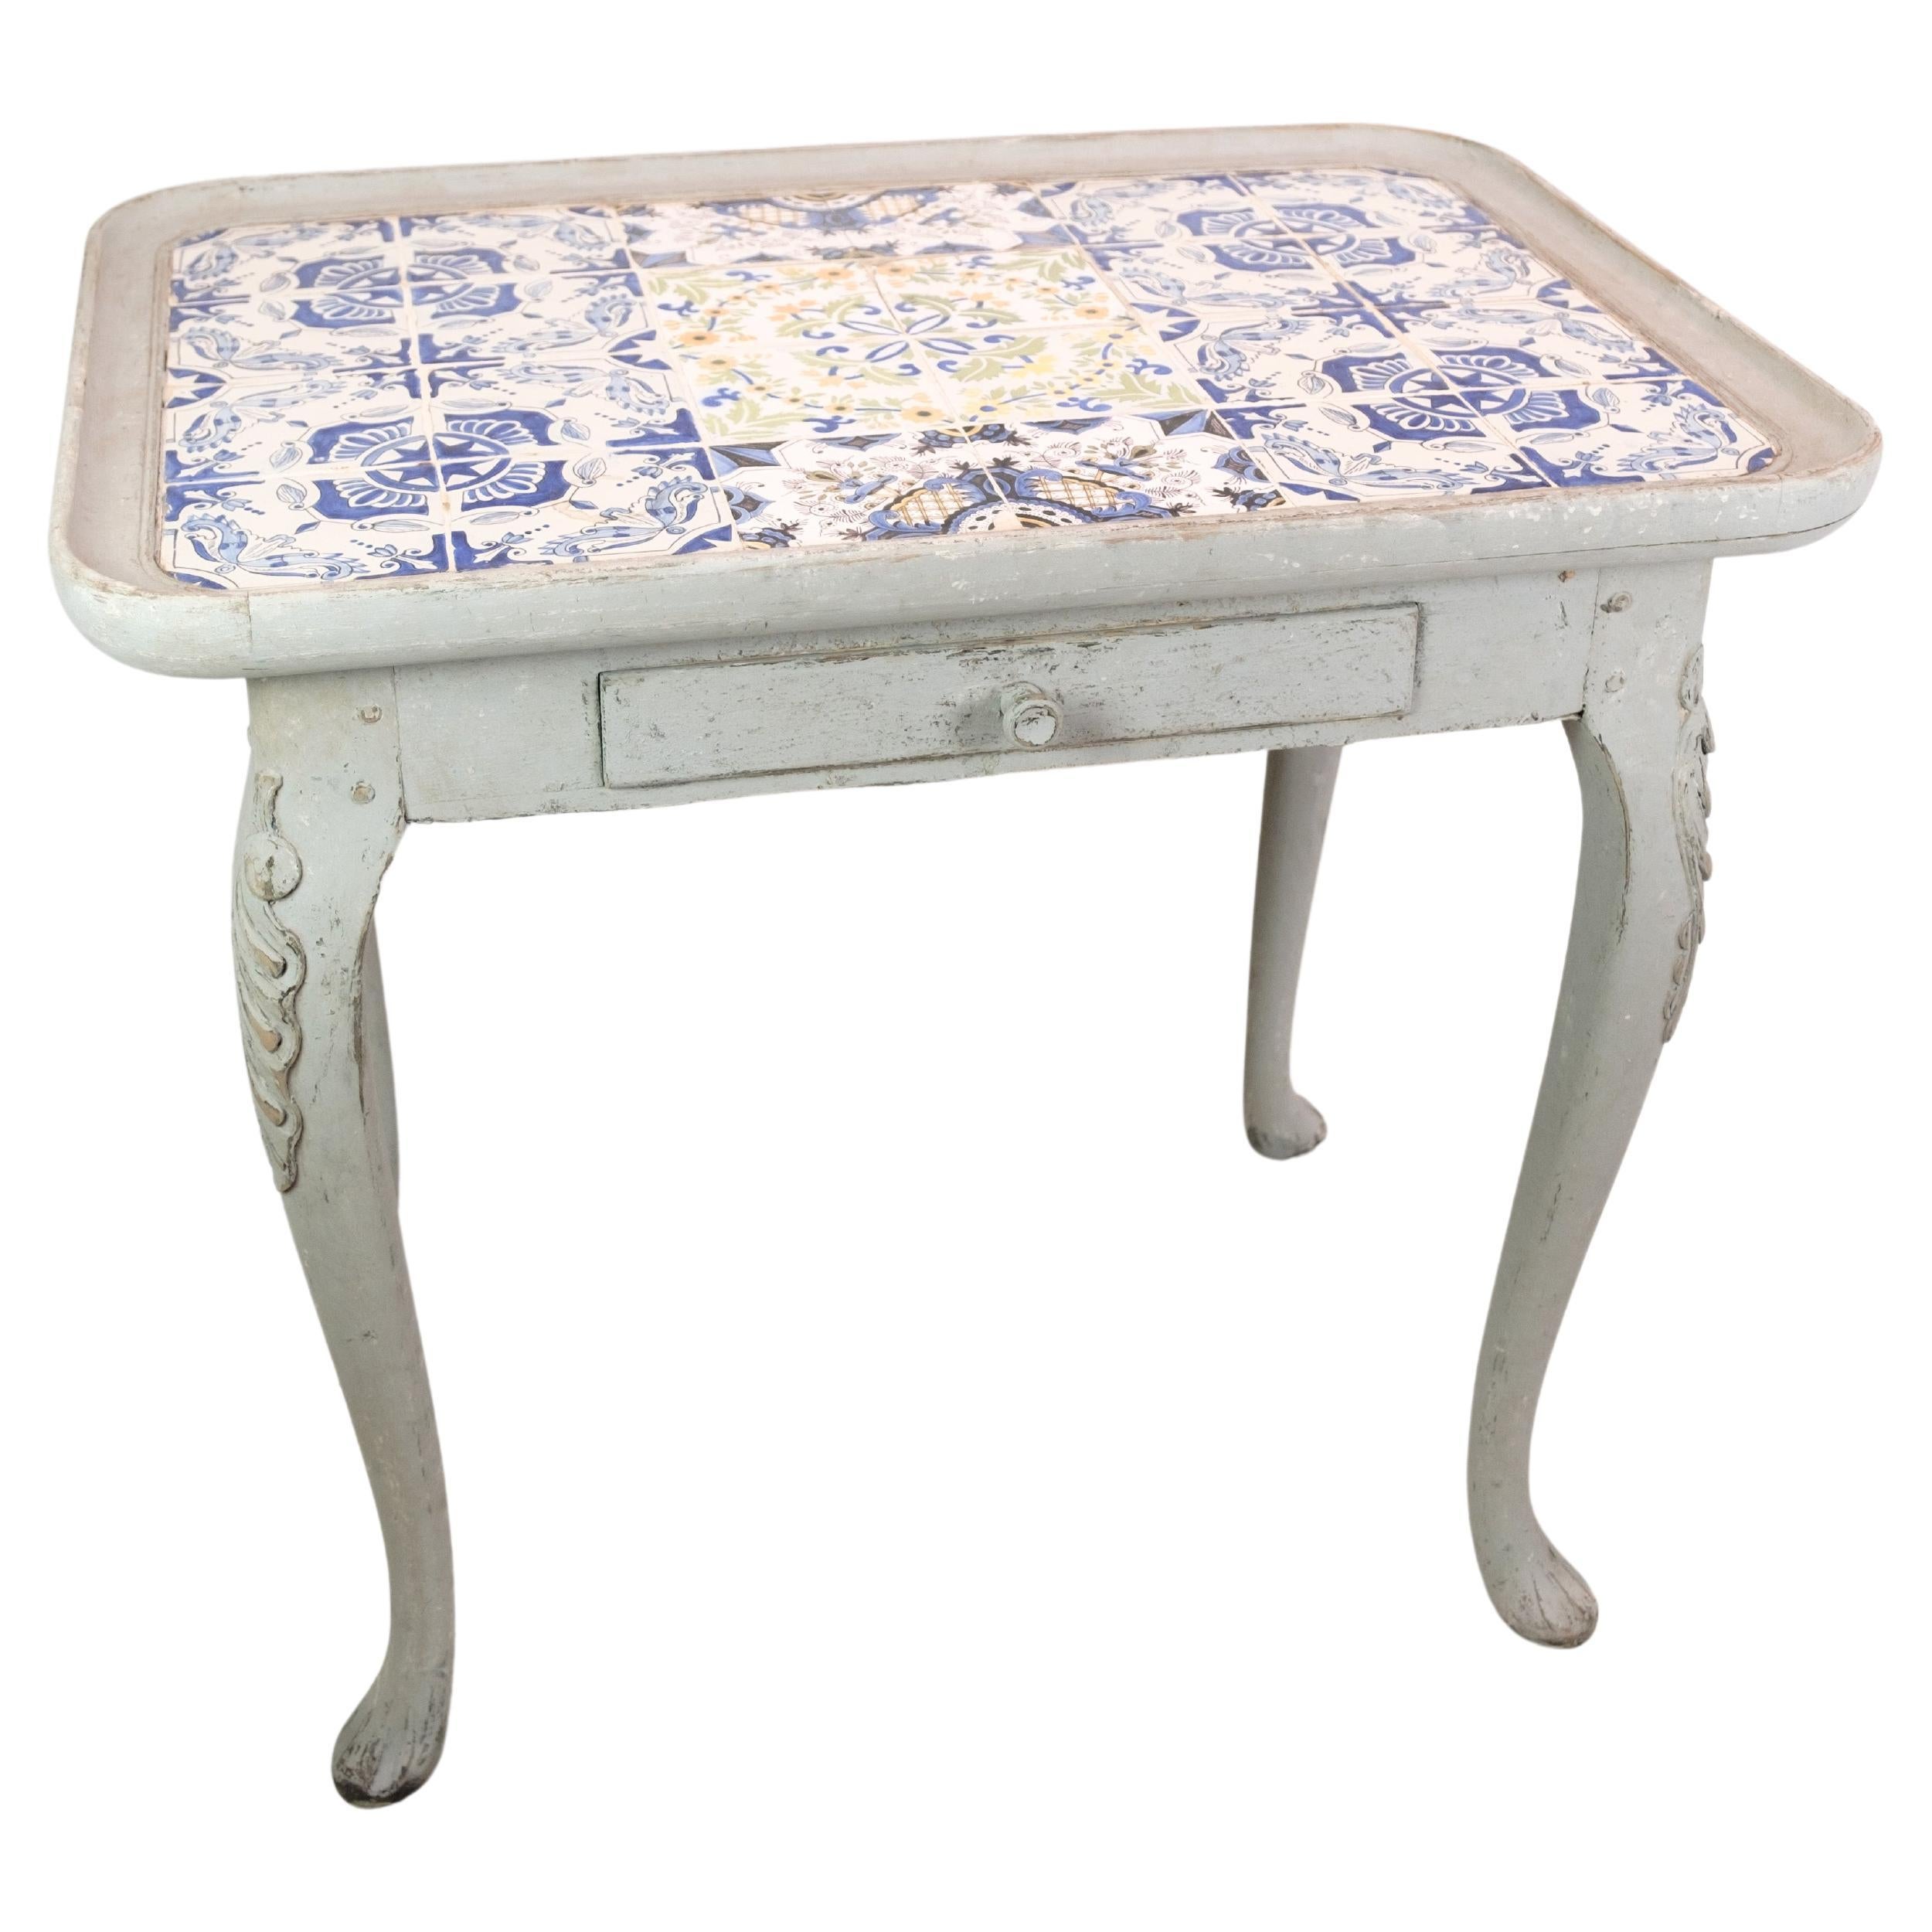 The Rococo Tile Table Painted in Grey From 1780s